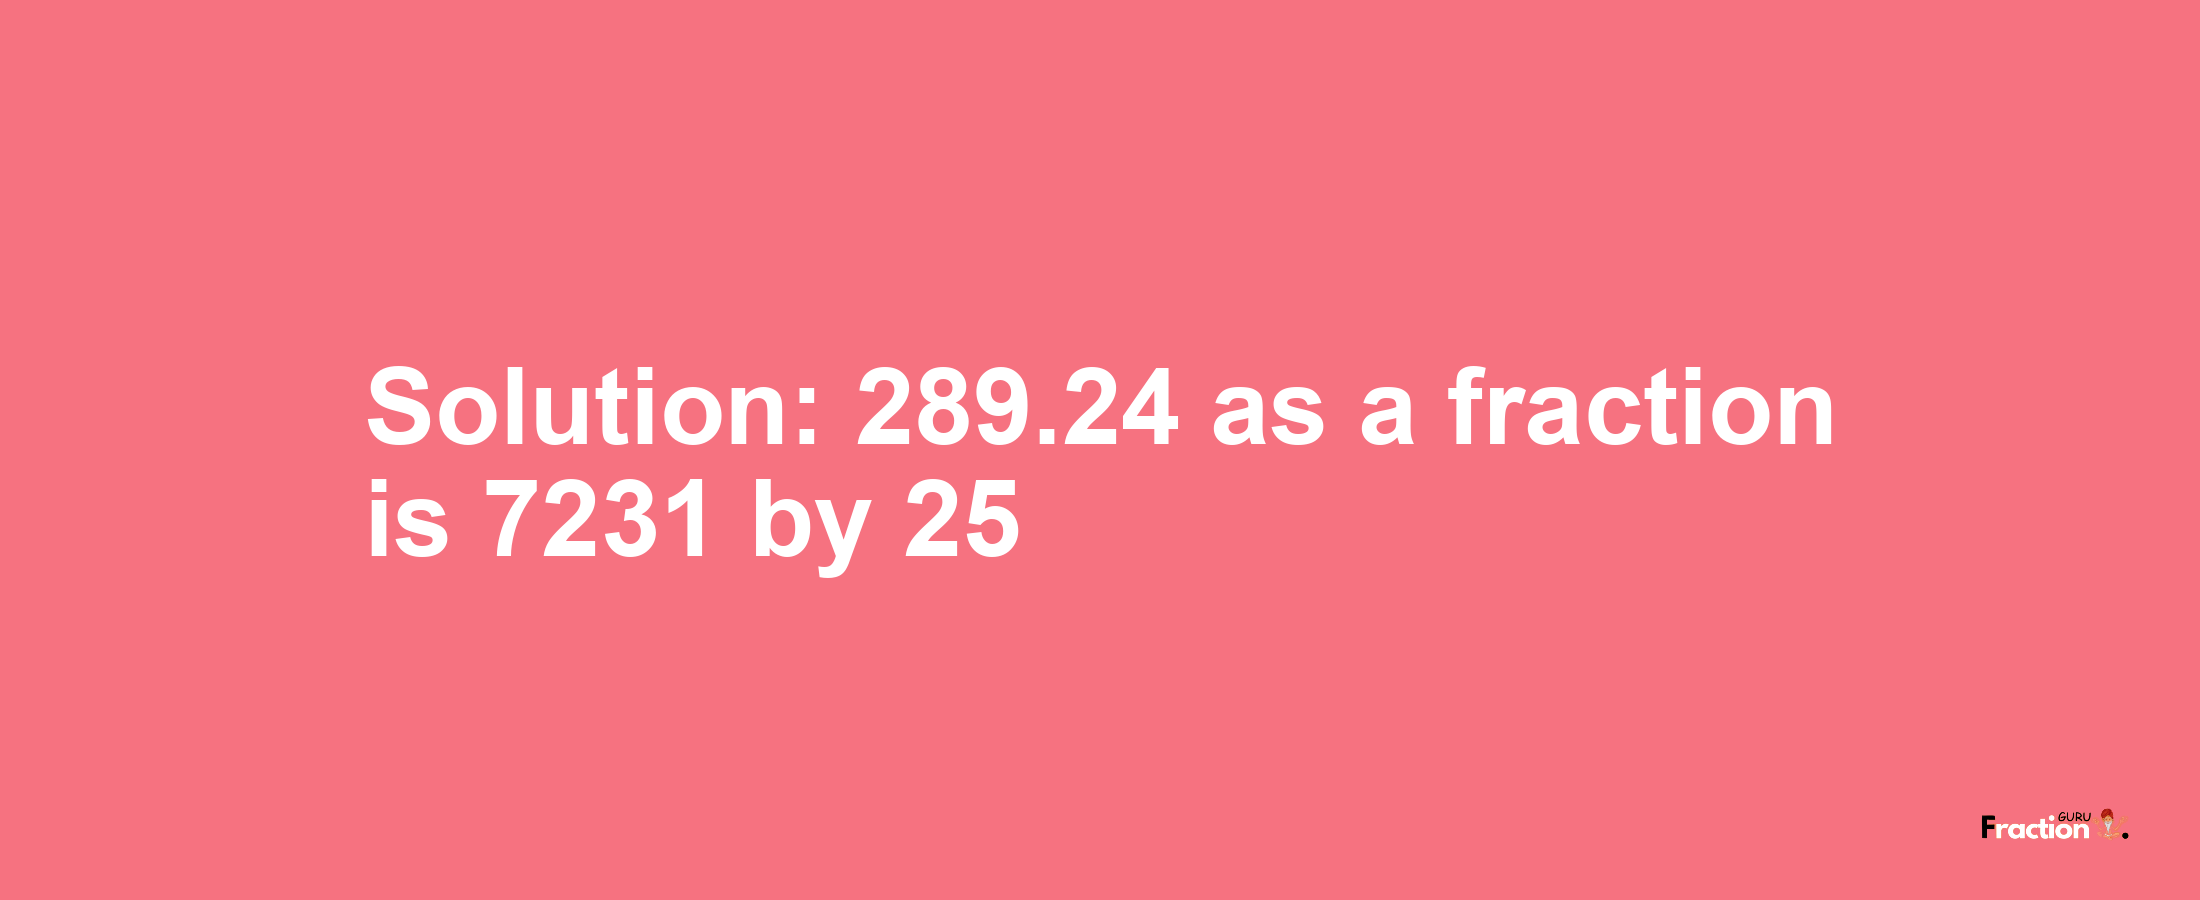 Solution:289.24 as a fraction is 7231/25